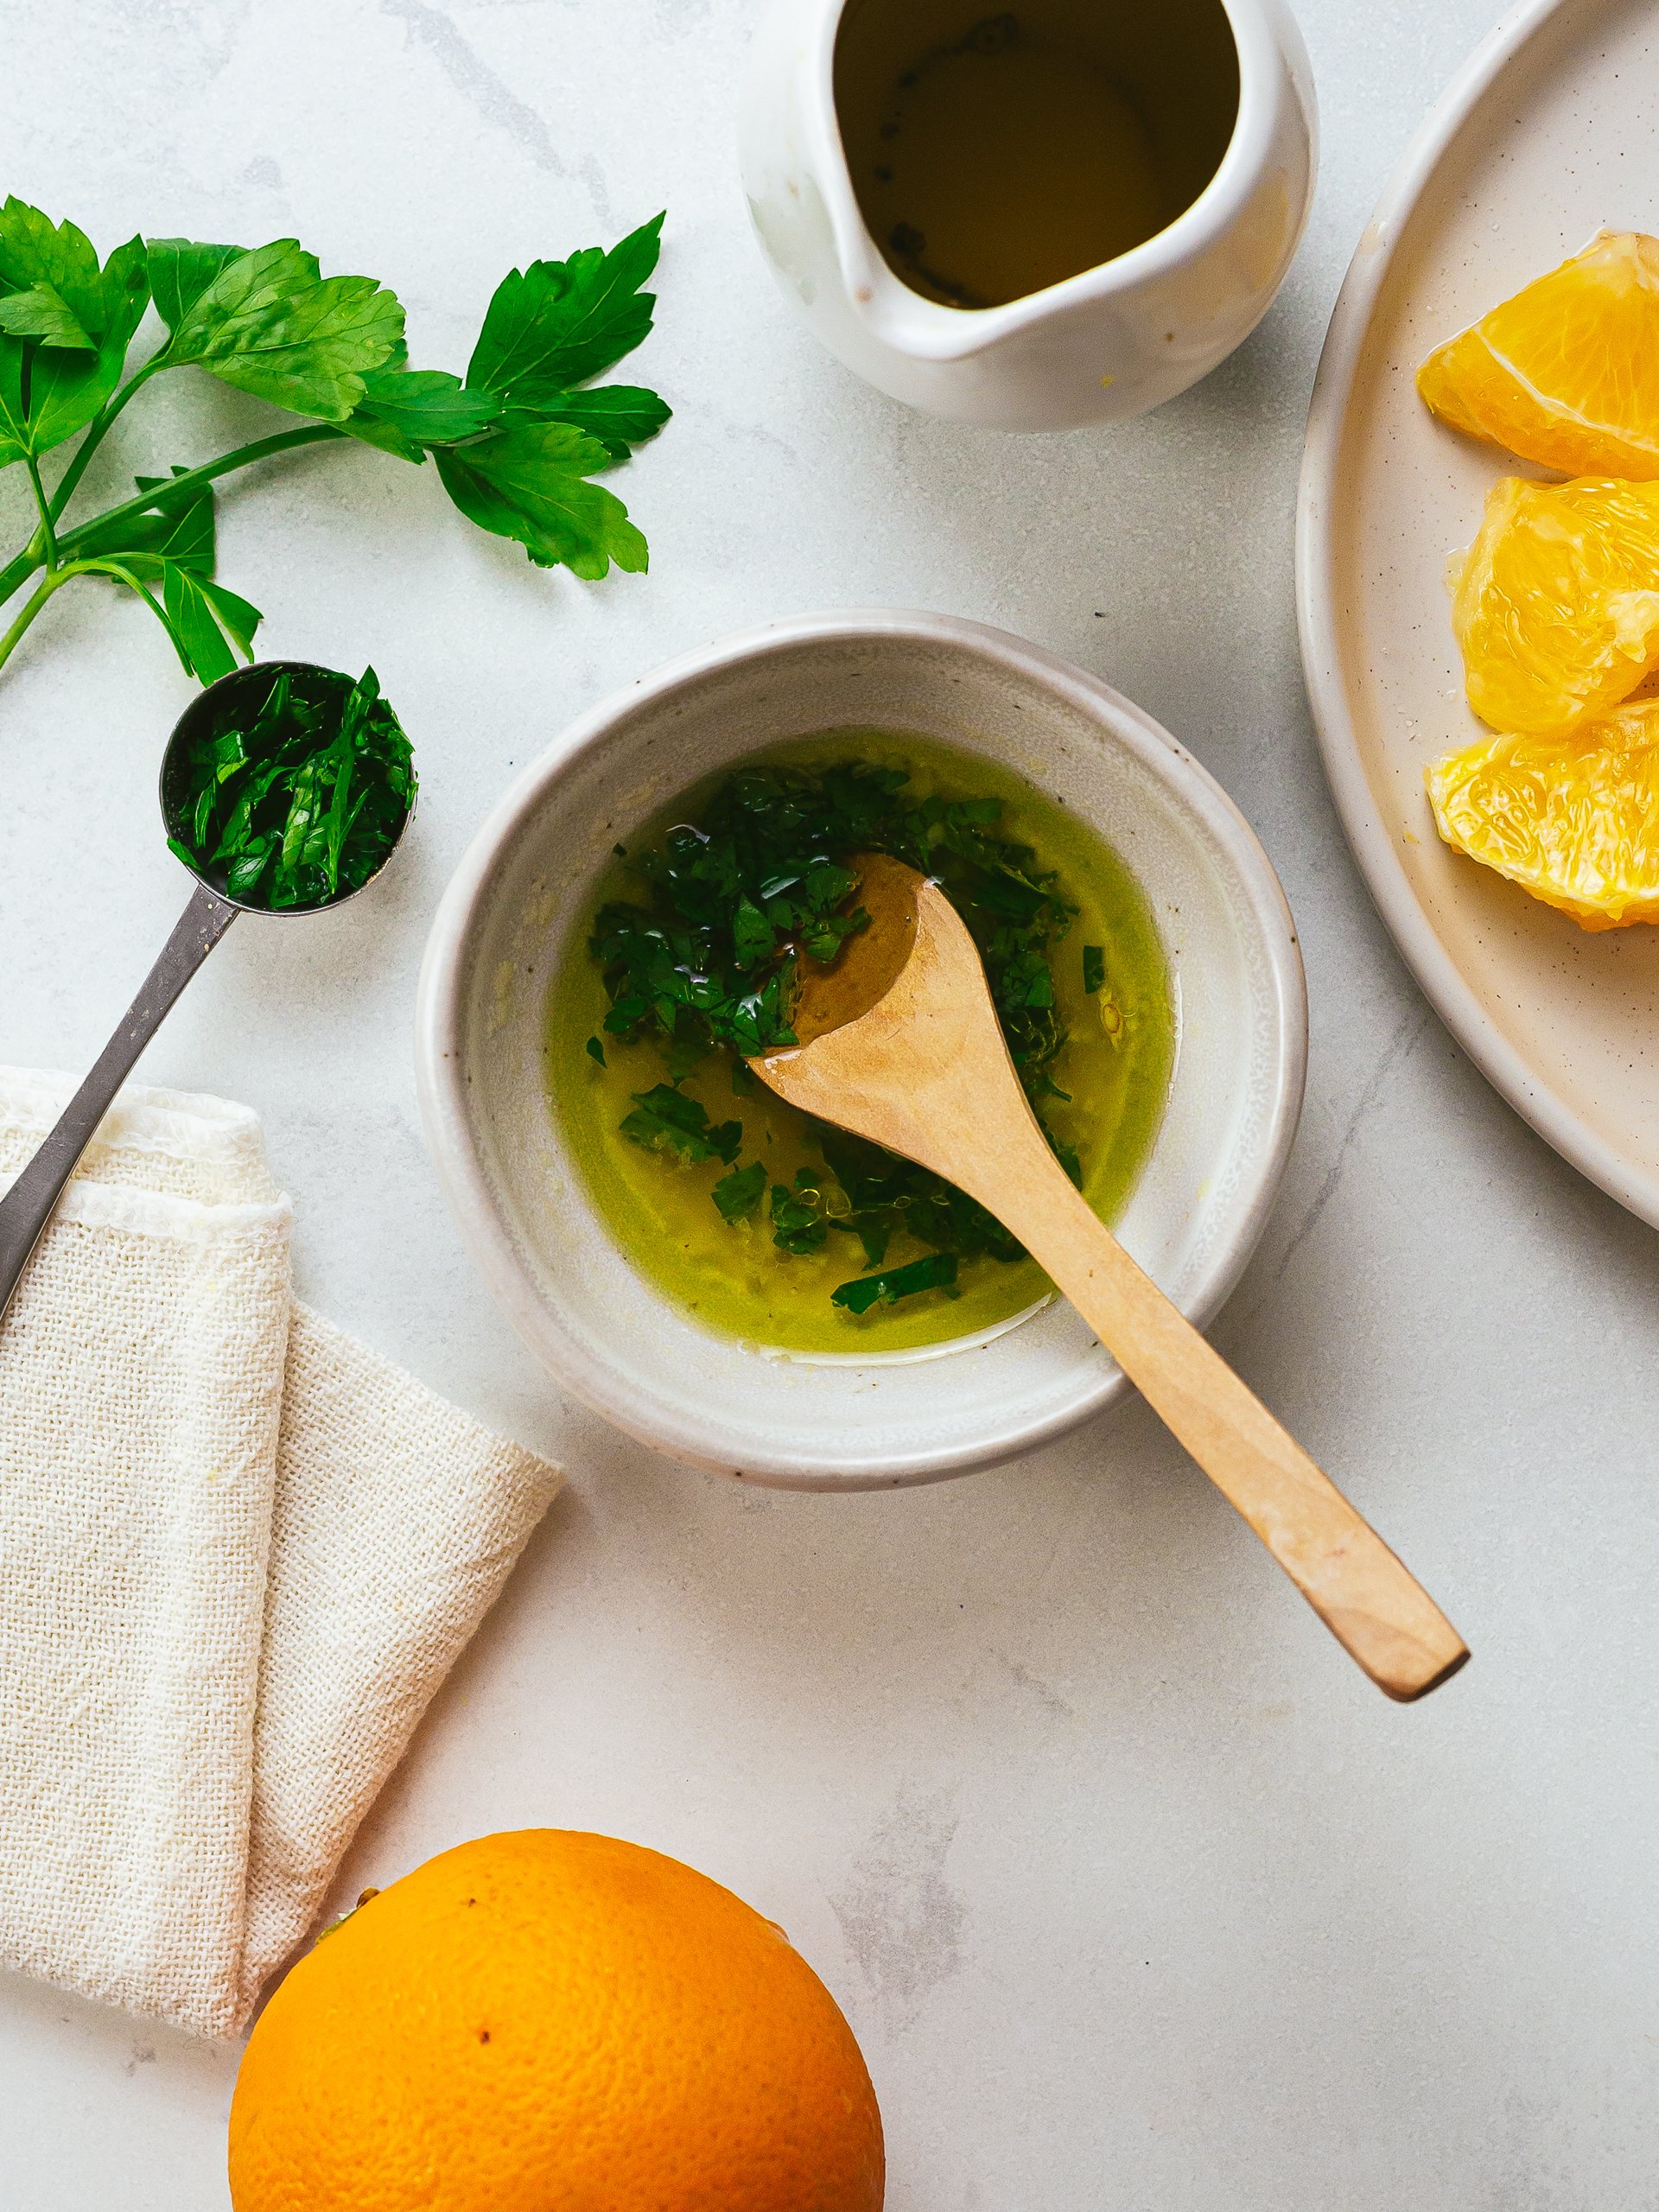 anti-inflammatory dressing with olive oil, parsley, orange and garlic